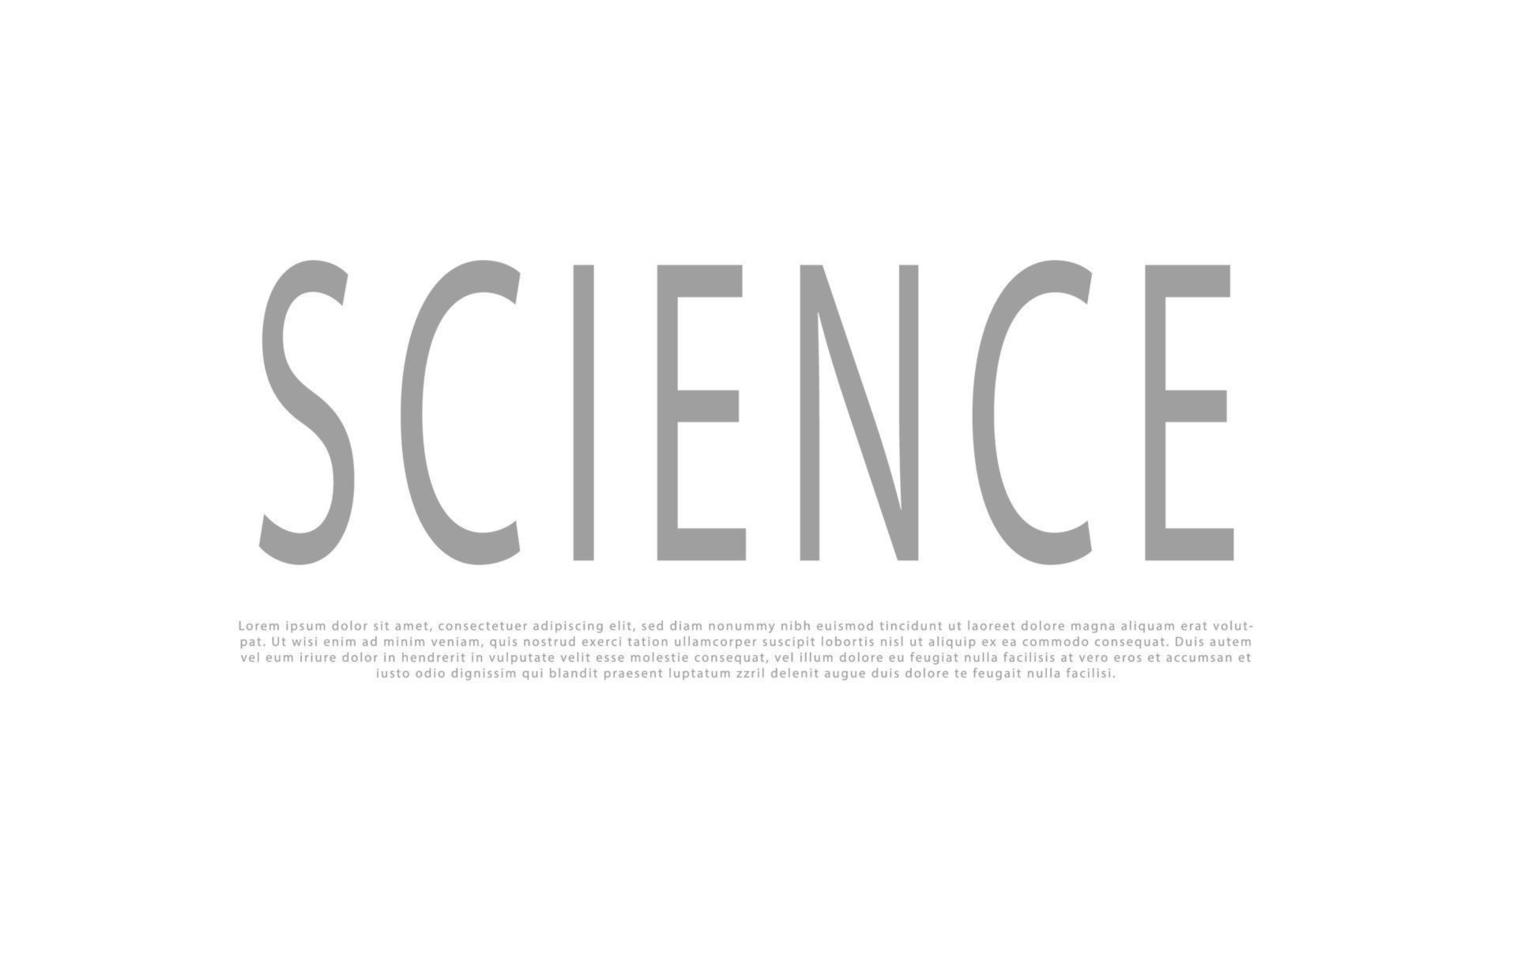 Science - field that uses scientific methods, processes, algorithms and systems to extract knowledge and insights from structured and unstructured data, text quote concept background elegant gray vector